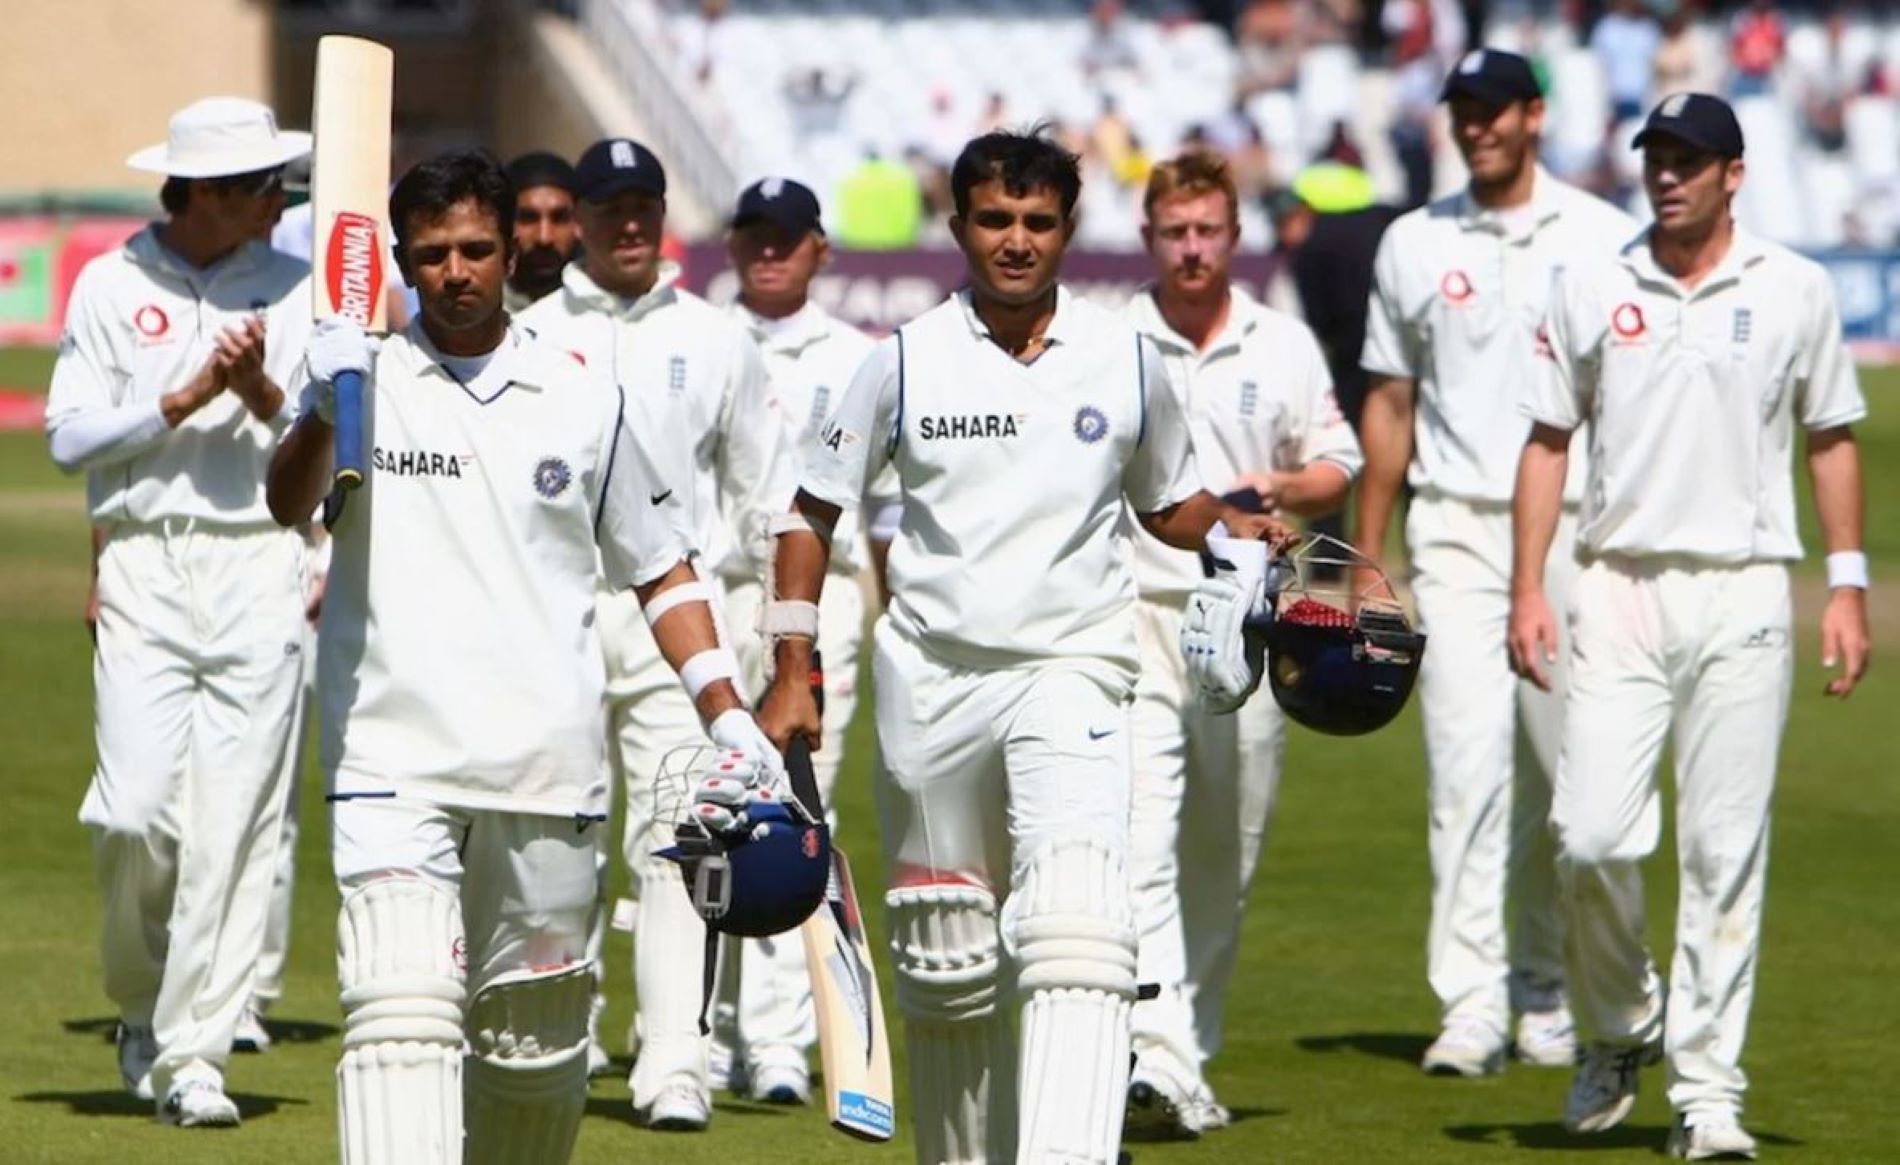 The two former captains were unbeaten as India celebrated a famous win in England.